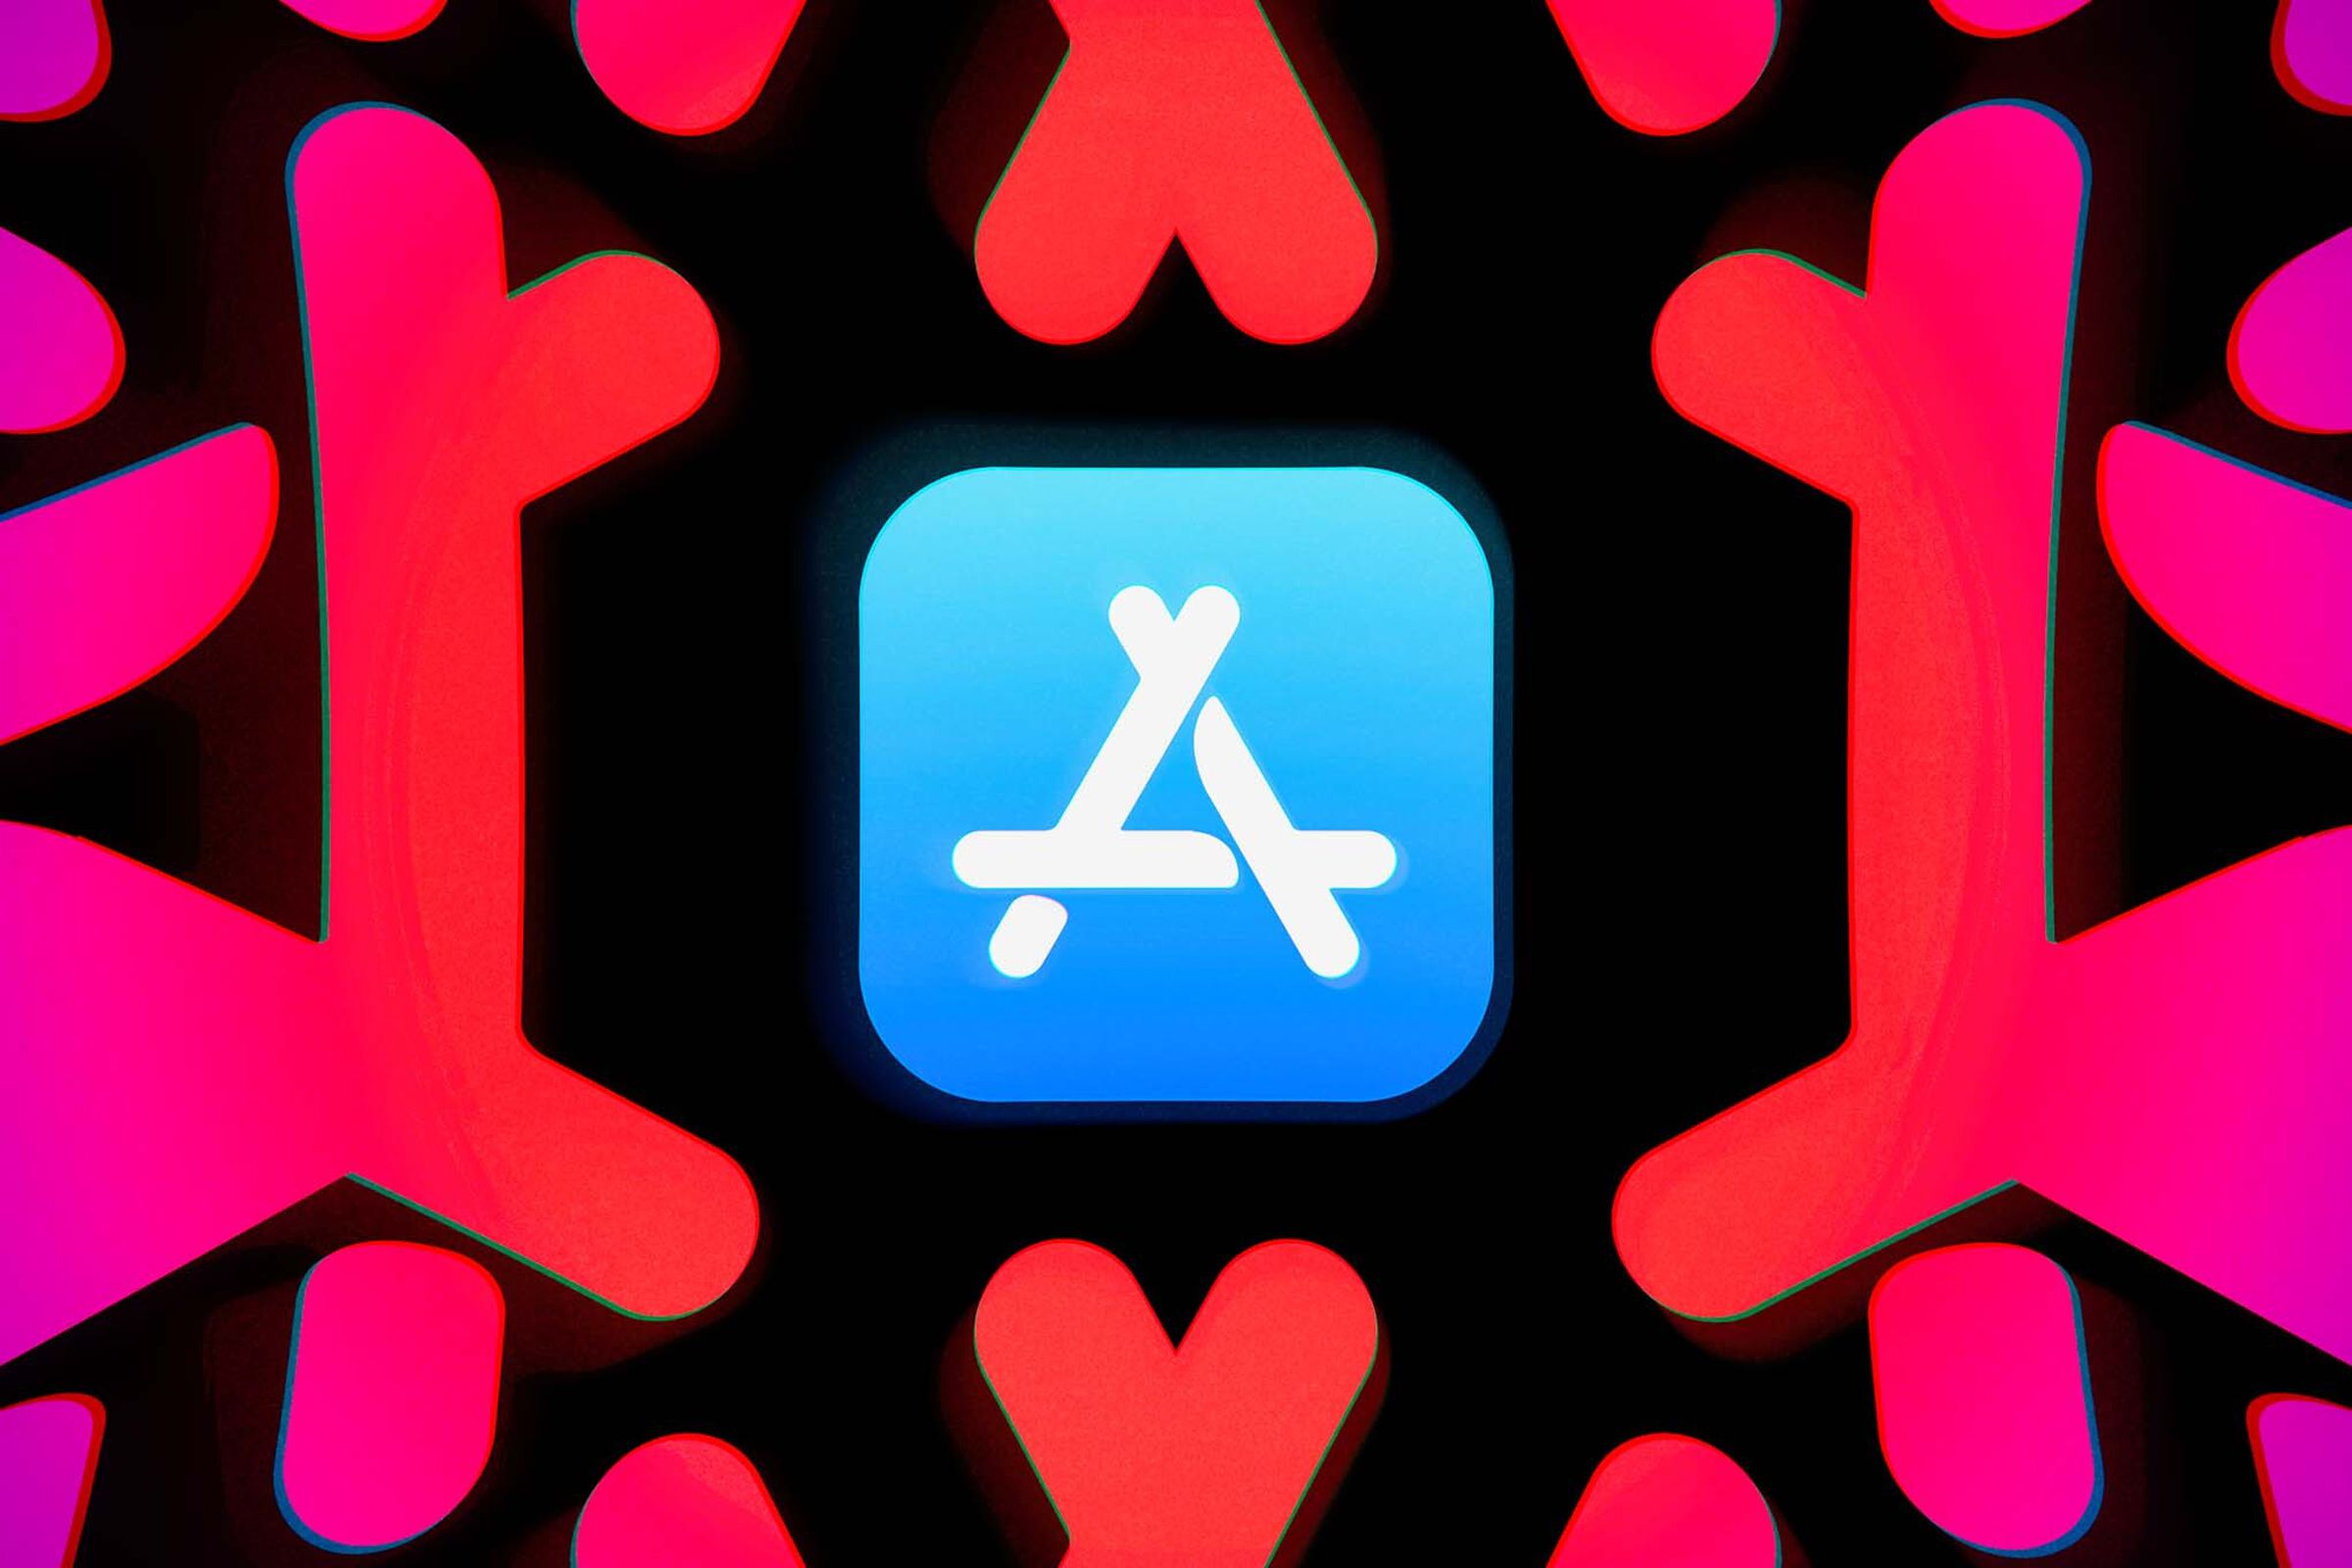 A picture of the App Store logo with larger, red versions of the App Store “A” surrounding it on a black background.